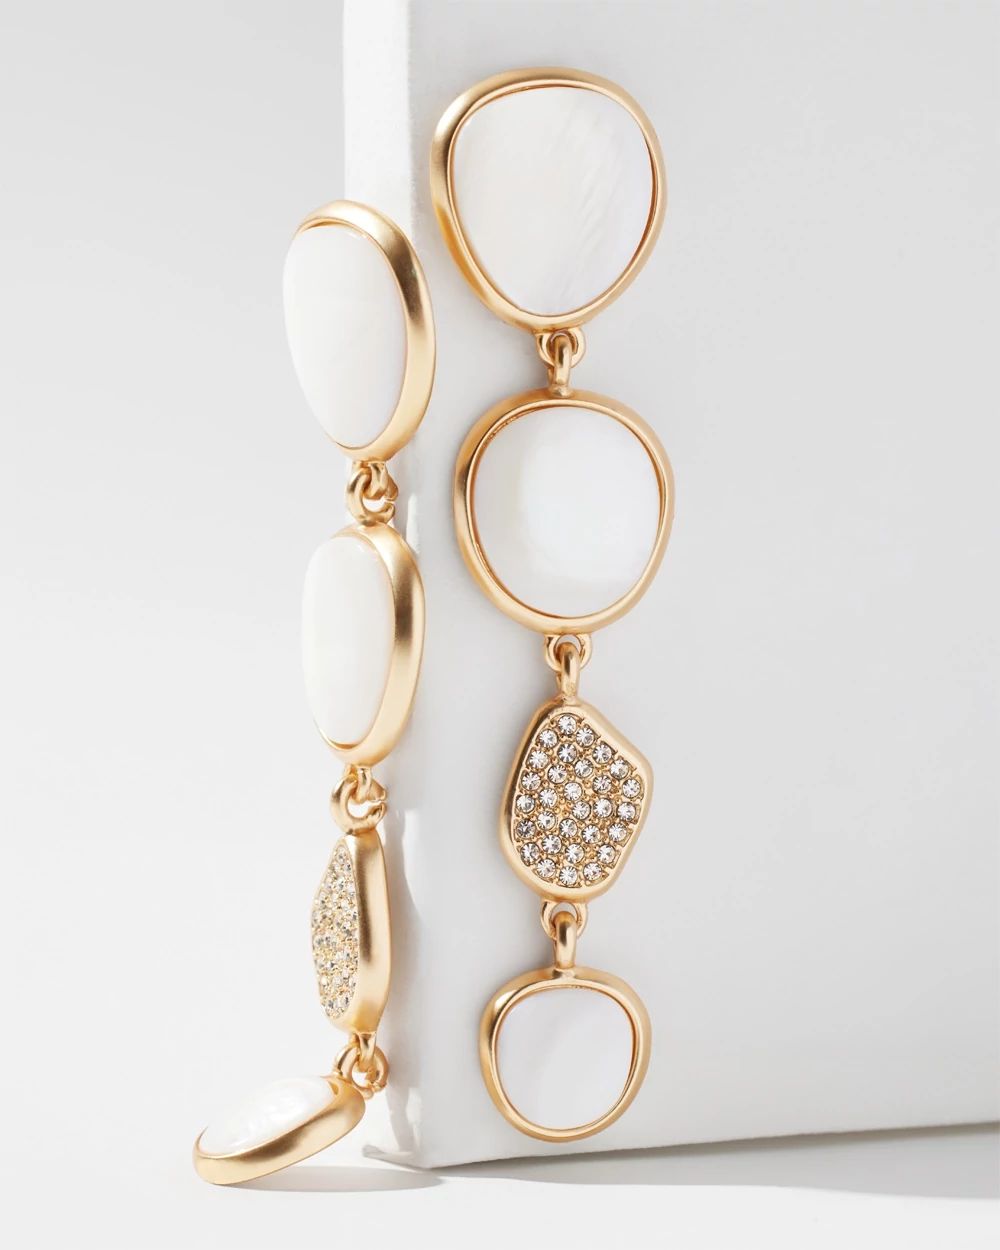 Goldtone + White Stone Linear Earrings click to view larger image.